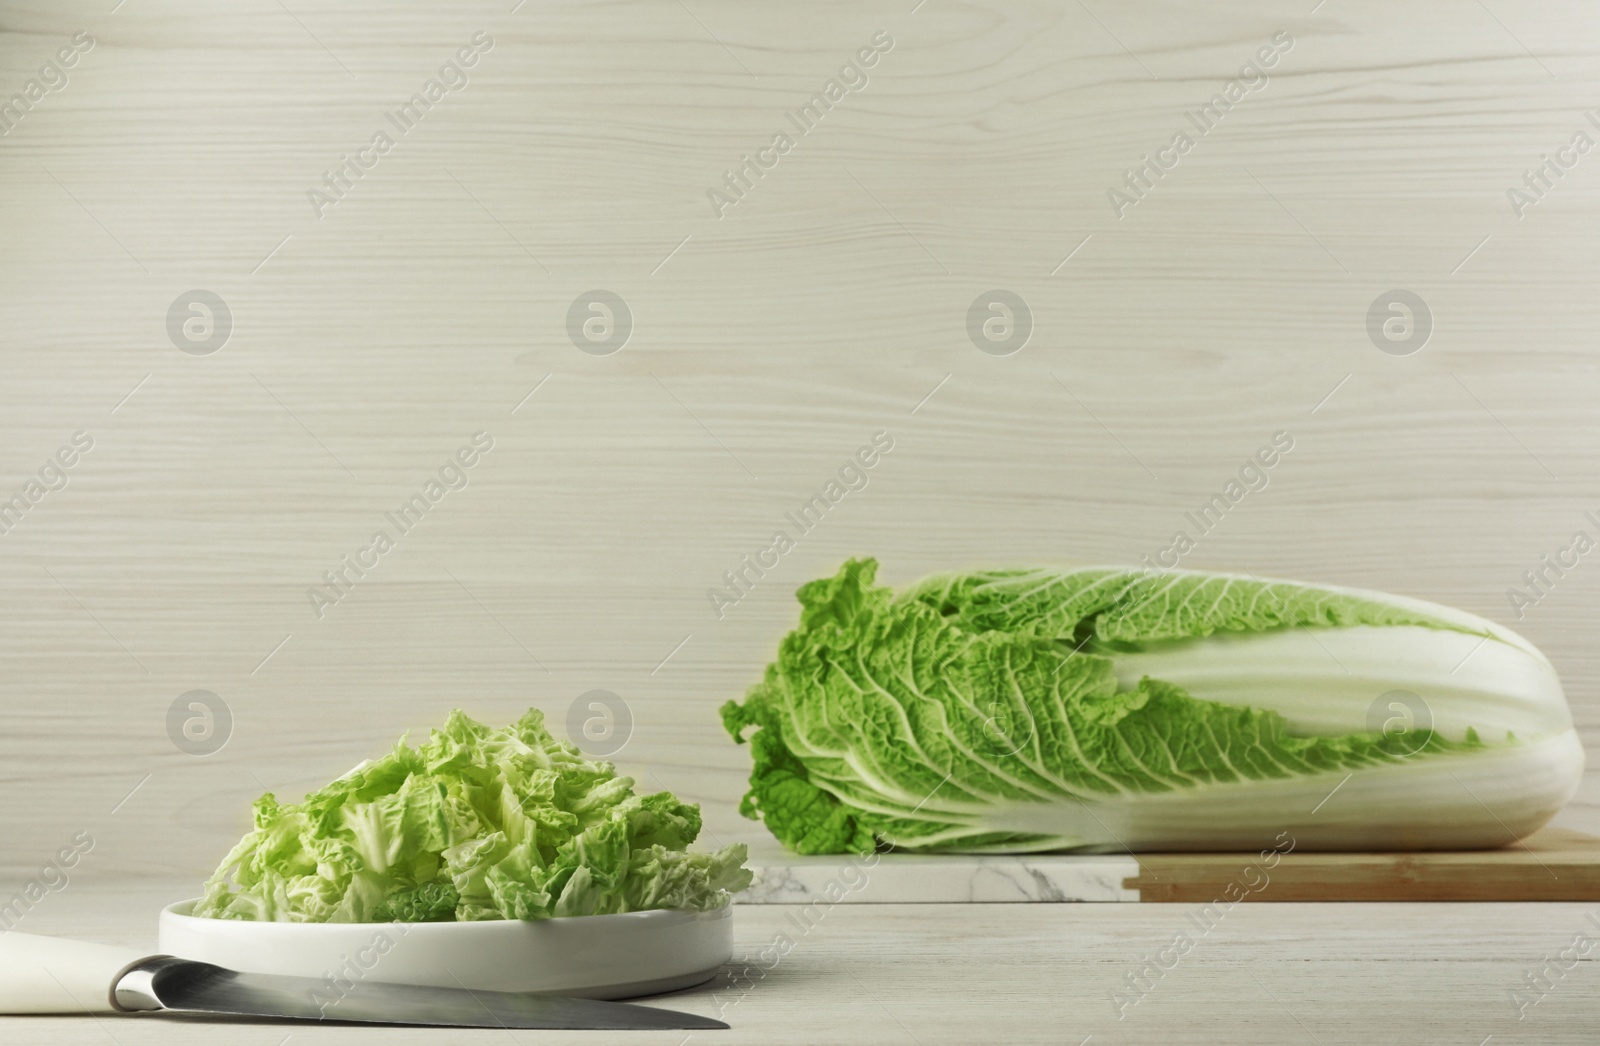 Photo of Whole and cut fresh ripe Chinese cabbage on table against white wooden background. Space for text